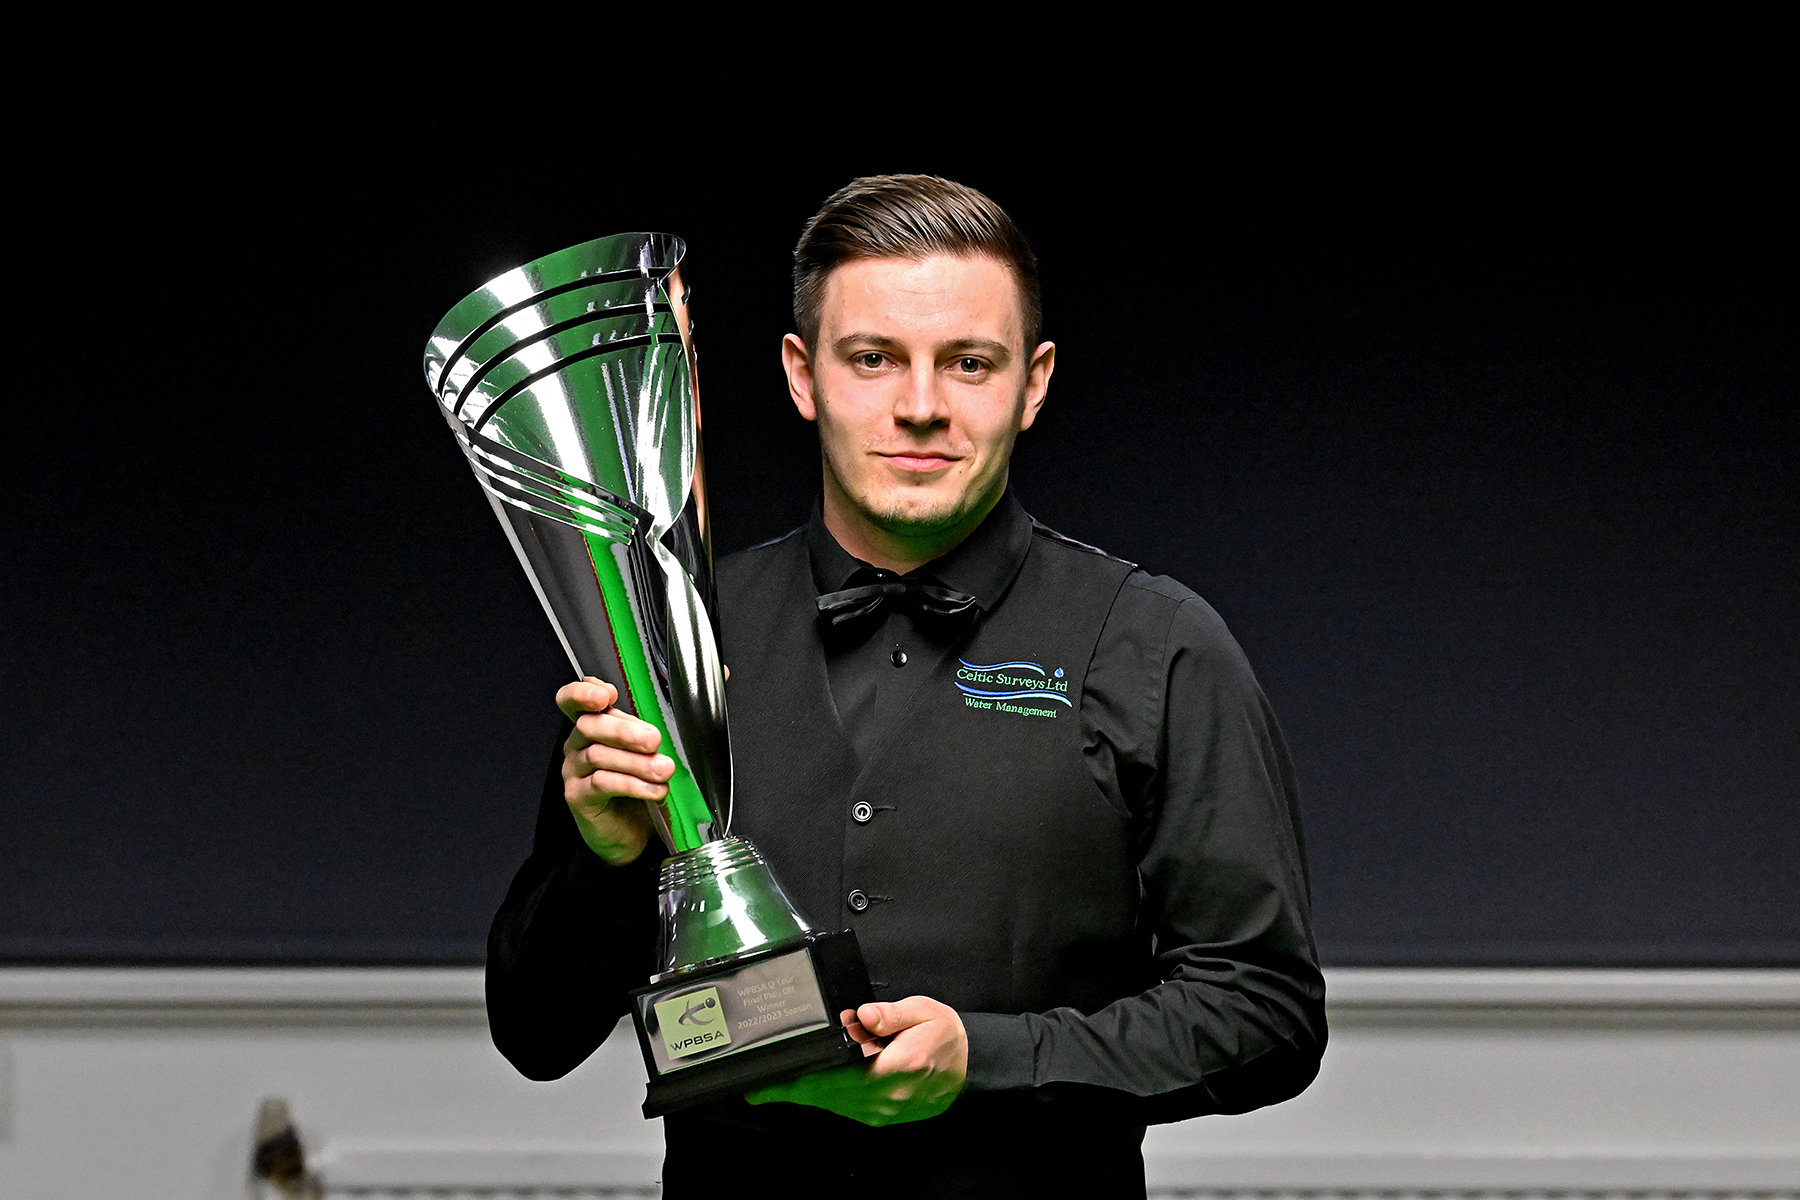 Playoff Champion Carty Returns to the World Snooker Tour